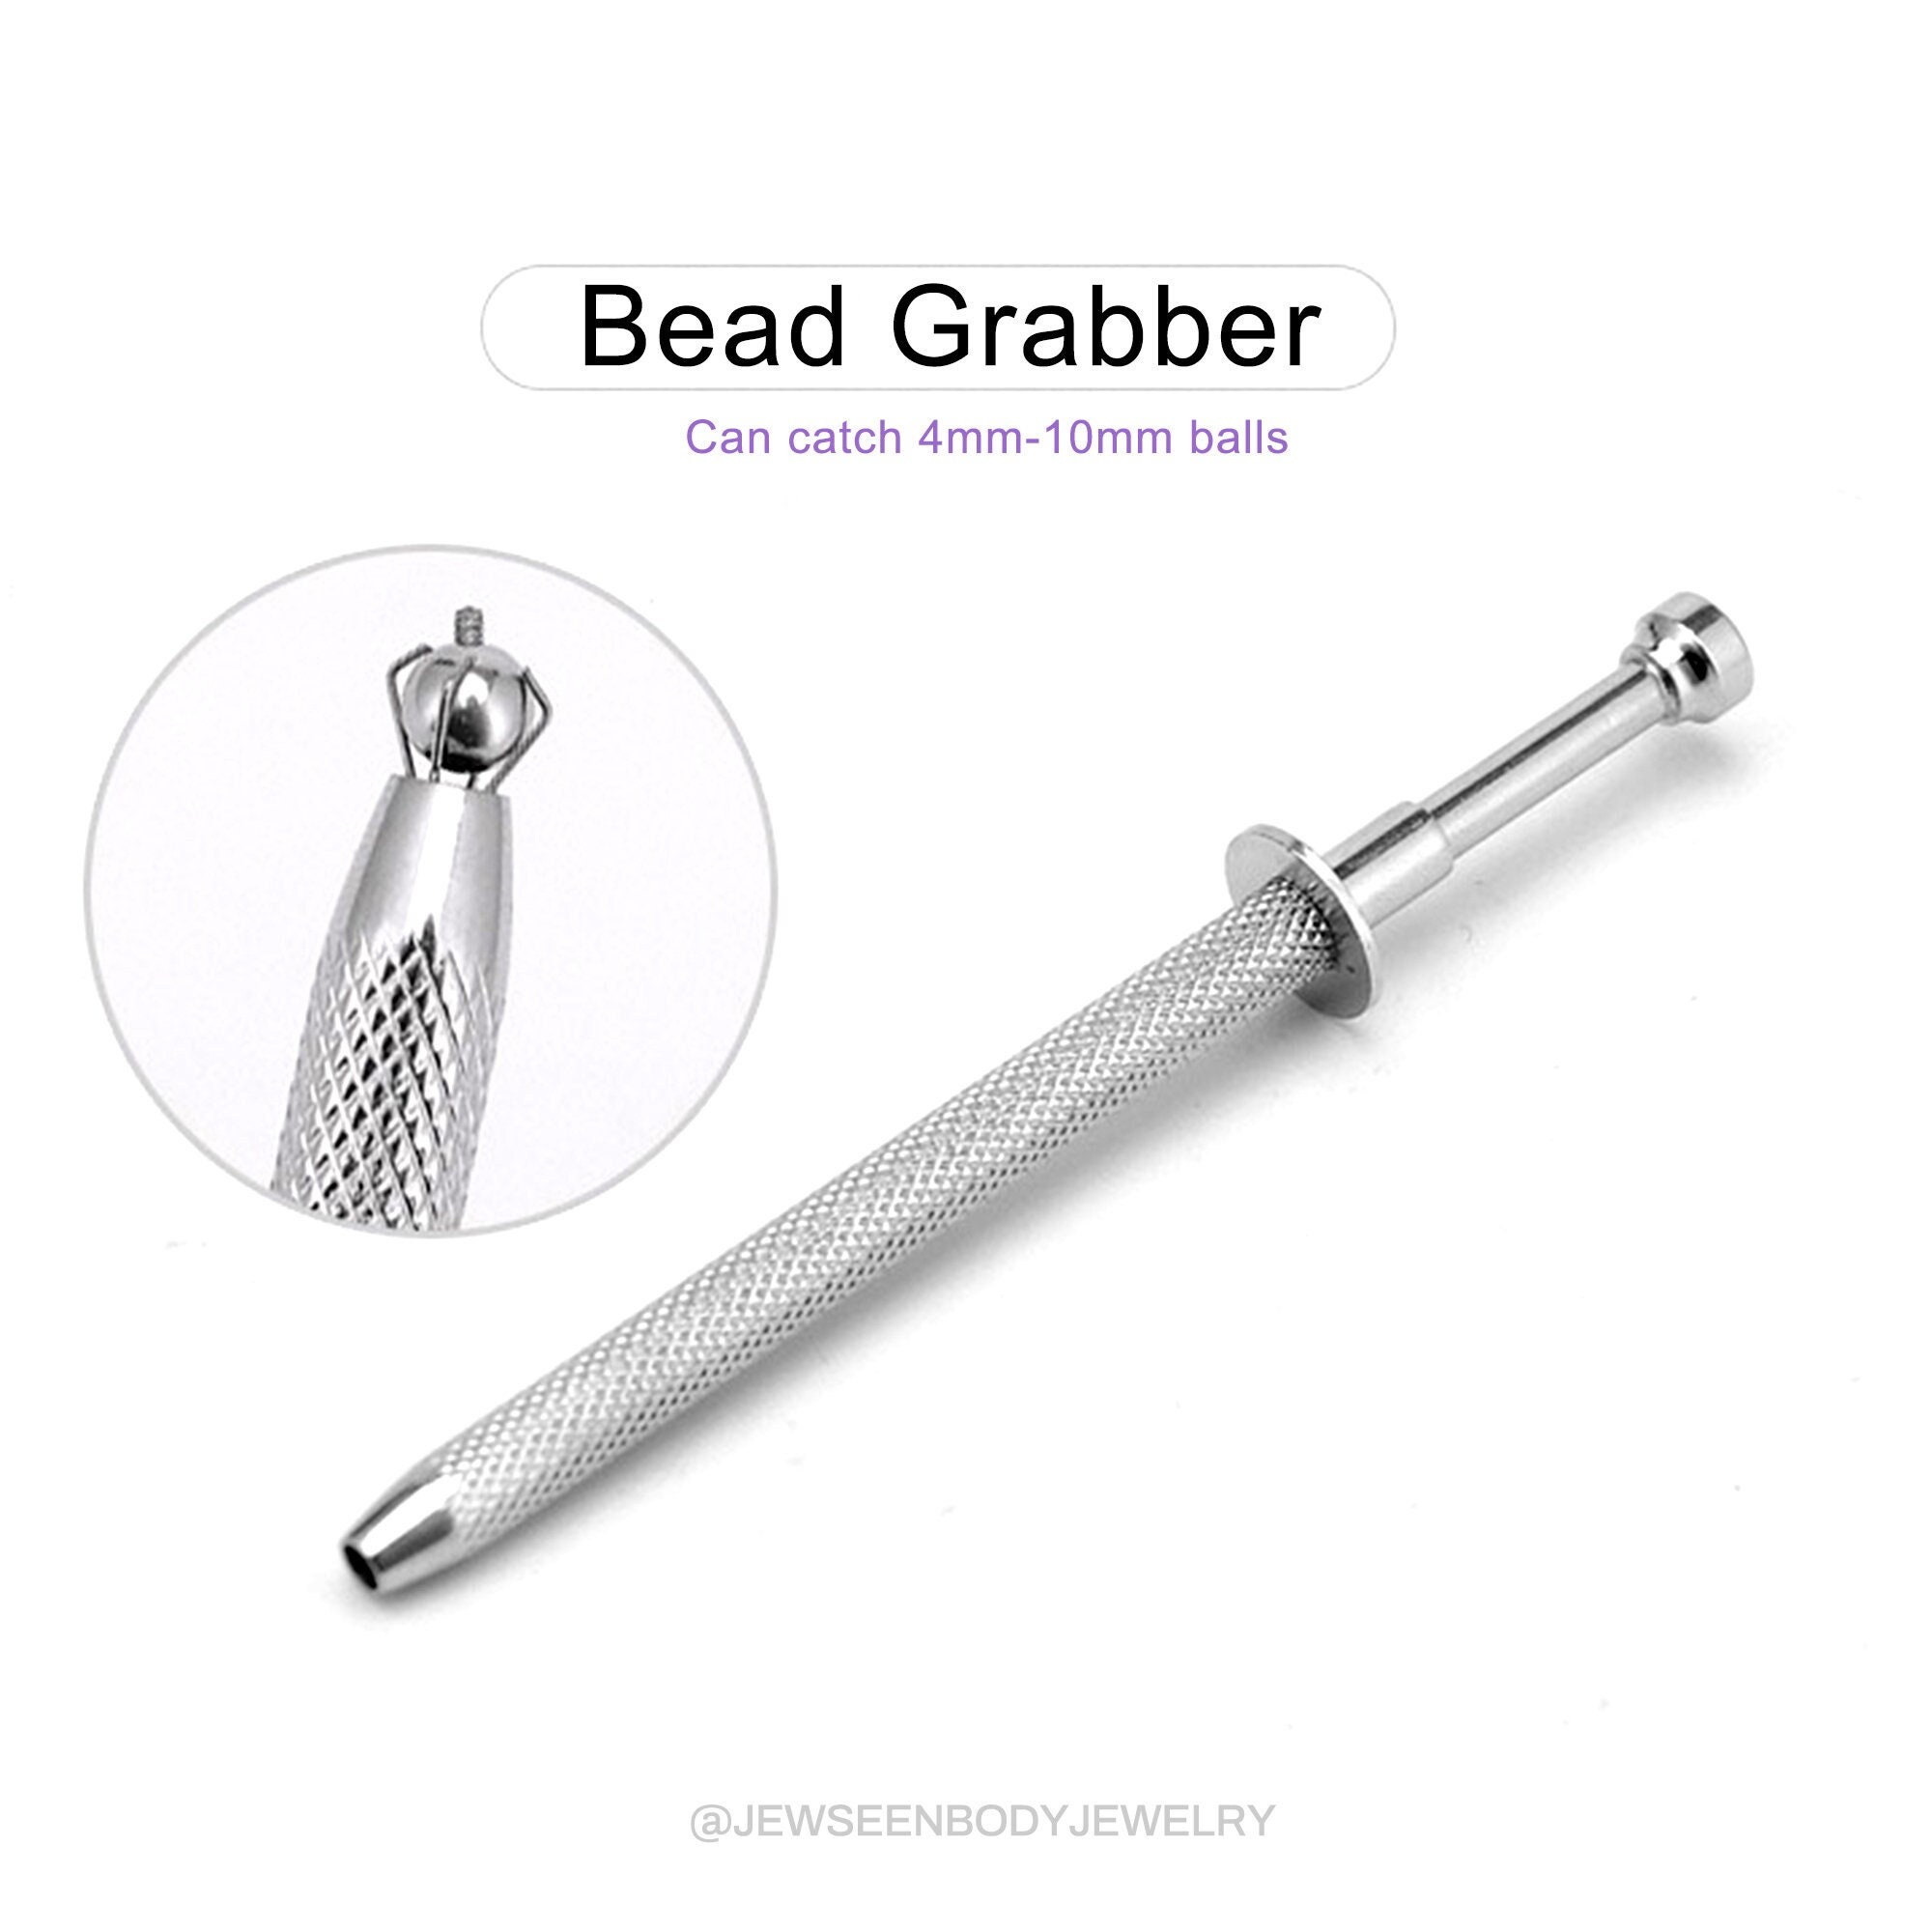 Push-in Syringe Style Quad Prong Small Bead Holder Piercing Tool, Bead  Grabber, Body Piercing Tool, Pick up Tool, Screw Holder 